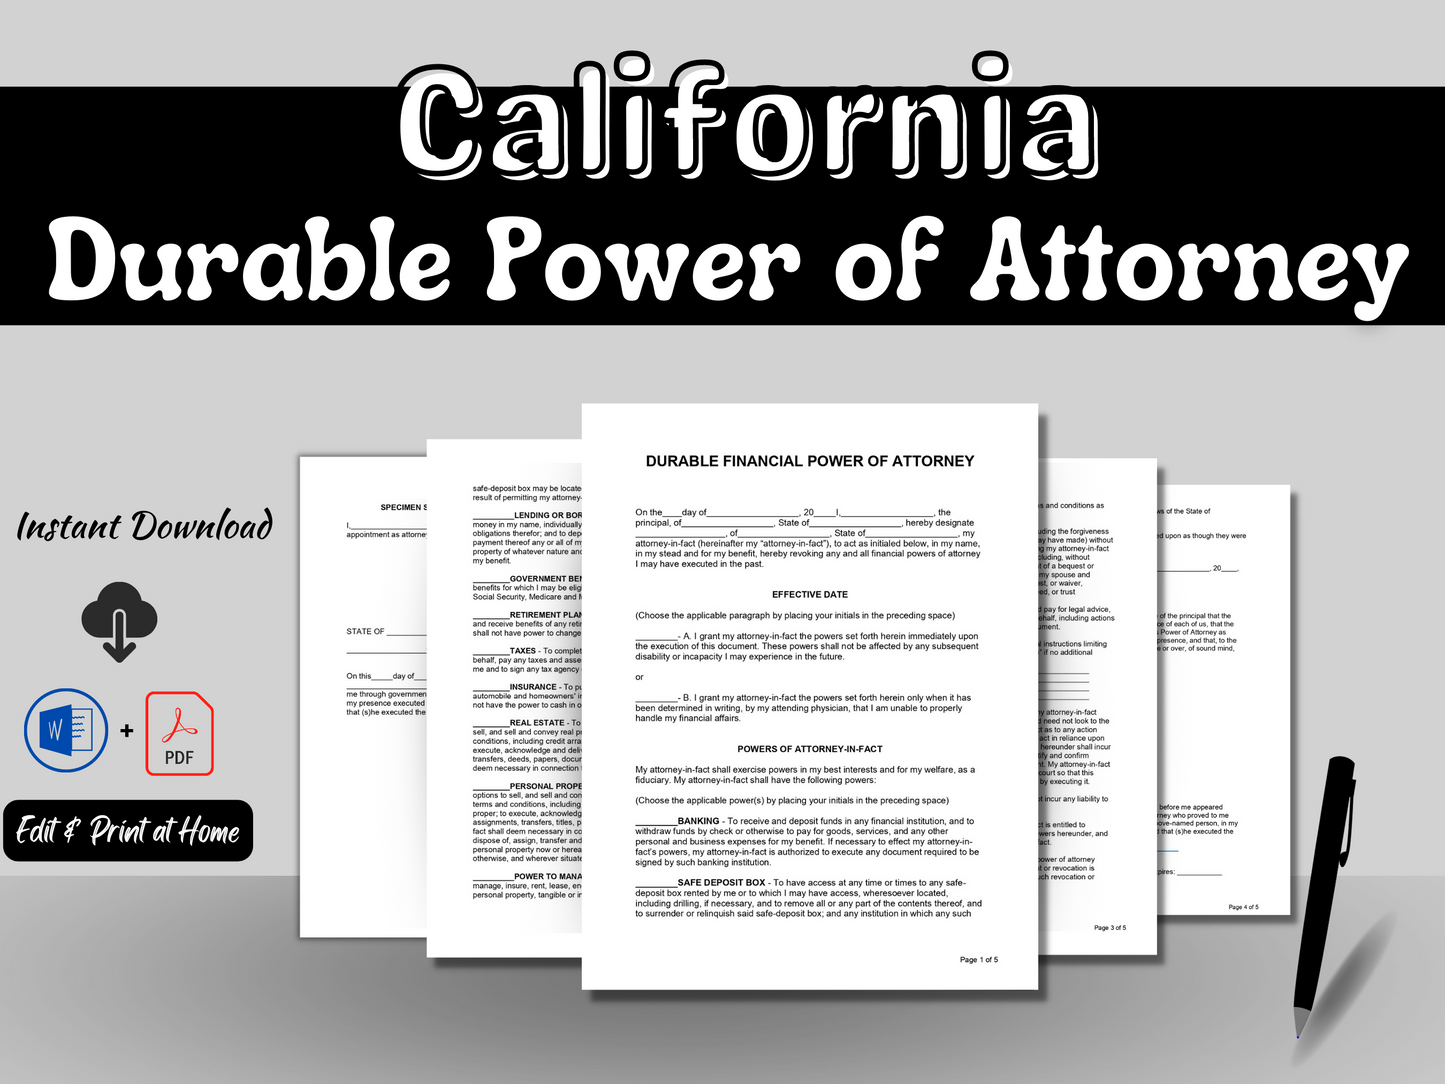 California Durable Financial Power of Attorney | Editable Template in Word Doc | Easy to Use - Finance Power of Attorney (DPOA) Statutory | Easy to Use - Drafted by an Attorney |